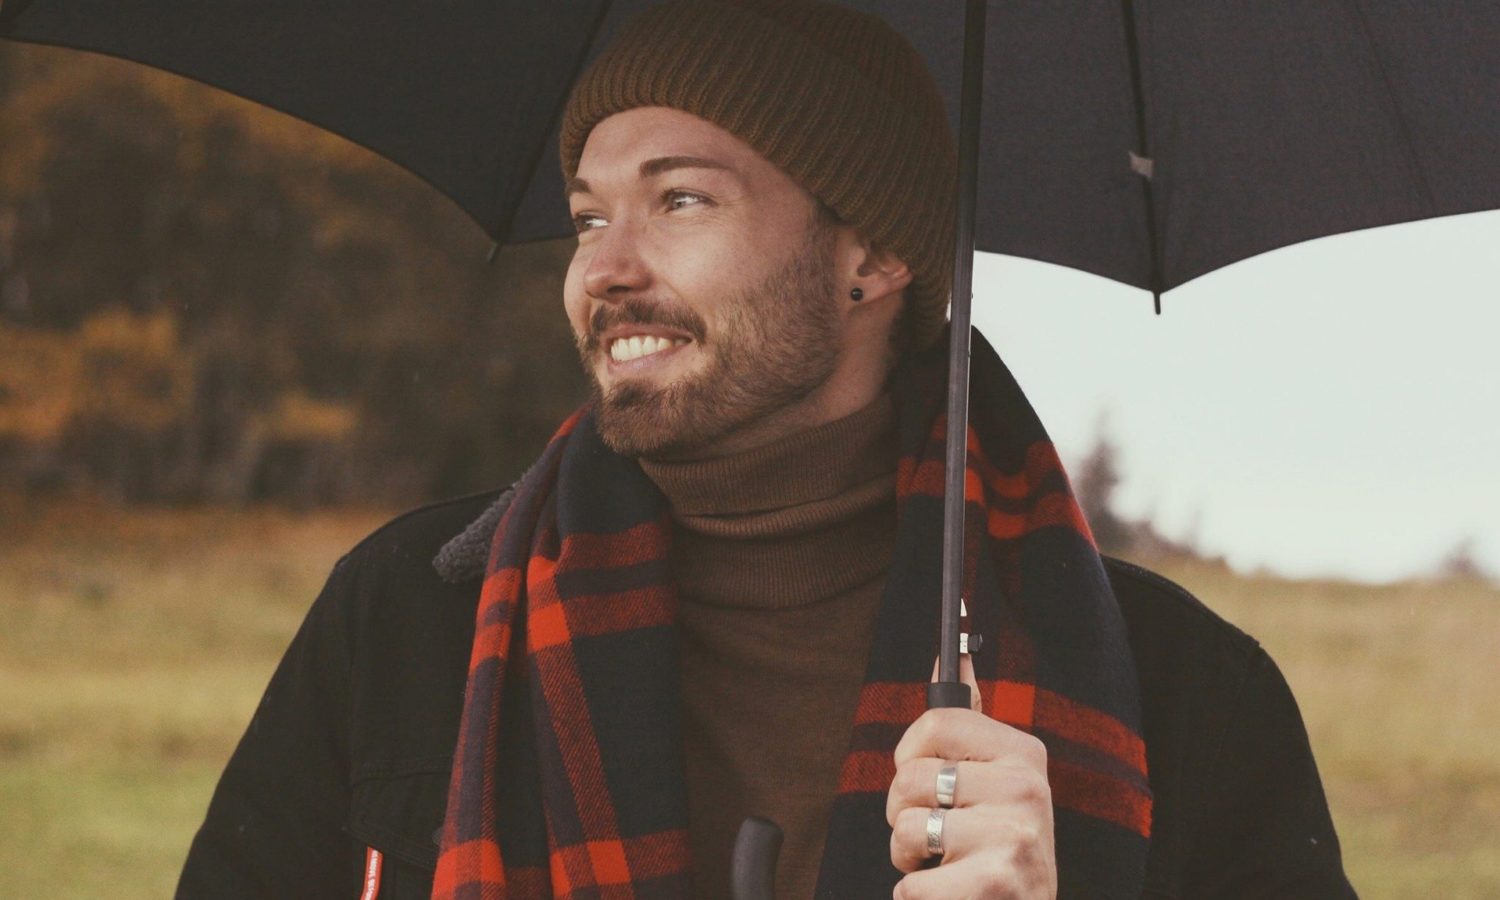 Happy, smiling man holding an umbrella smiling off camera wearing a scarf and wooly hat